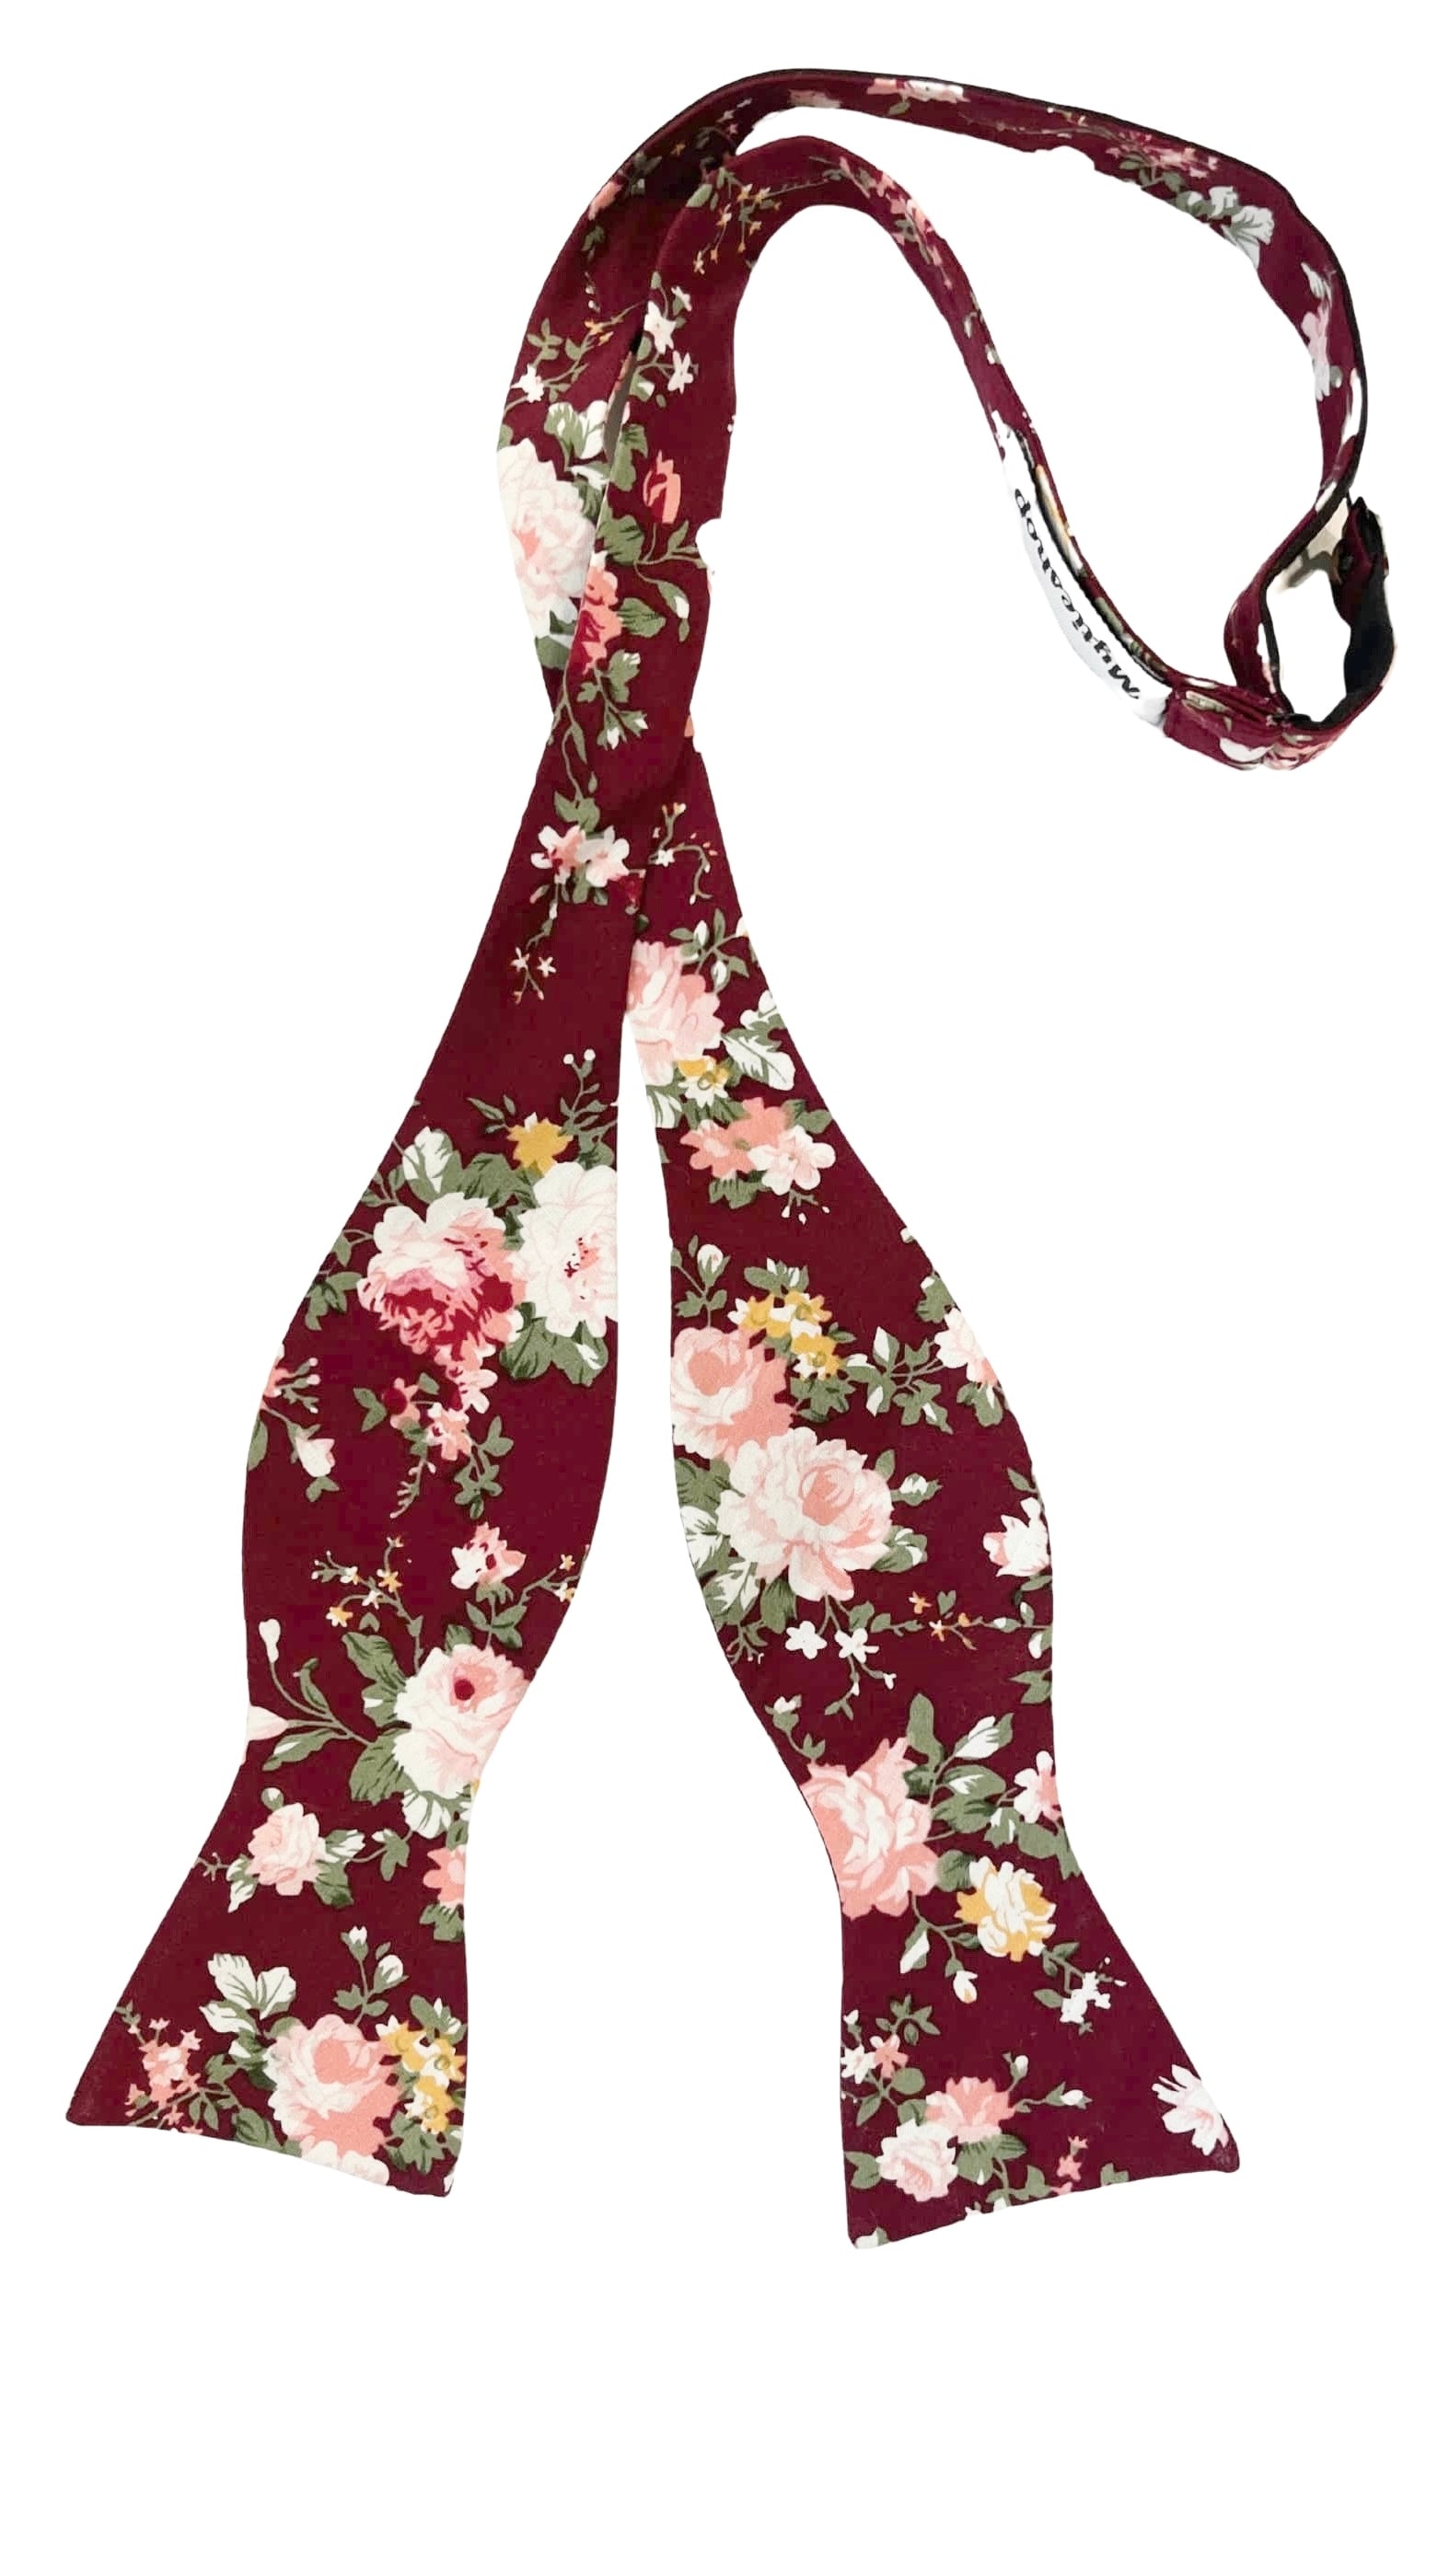 Burgundy Floral Bow Tie Self Tie WESLEY - MYTIESHOP-Burgundy Floral Bow Tie Self Tie 100% Cotton Flannel Handmade Adjustable to fit most neck sizes 13 3/4&quot; - 18&quot; Color: Burgundy Be the best-dressed man in the room with this WESLEY Bow Tie in Burgundy. Mytieshop&#39;s bow ties are perfect for any formal occasion. Whether you&#39;re the groom at your own wedding or attending a friend&#39;s big day, this bow tie will have you looking your sharpest. The Burgundy hue is perfect for the fall and winter months, an